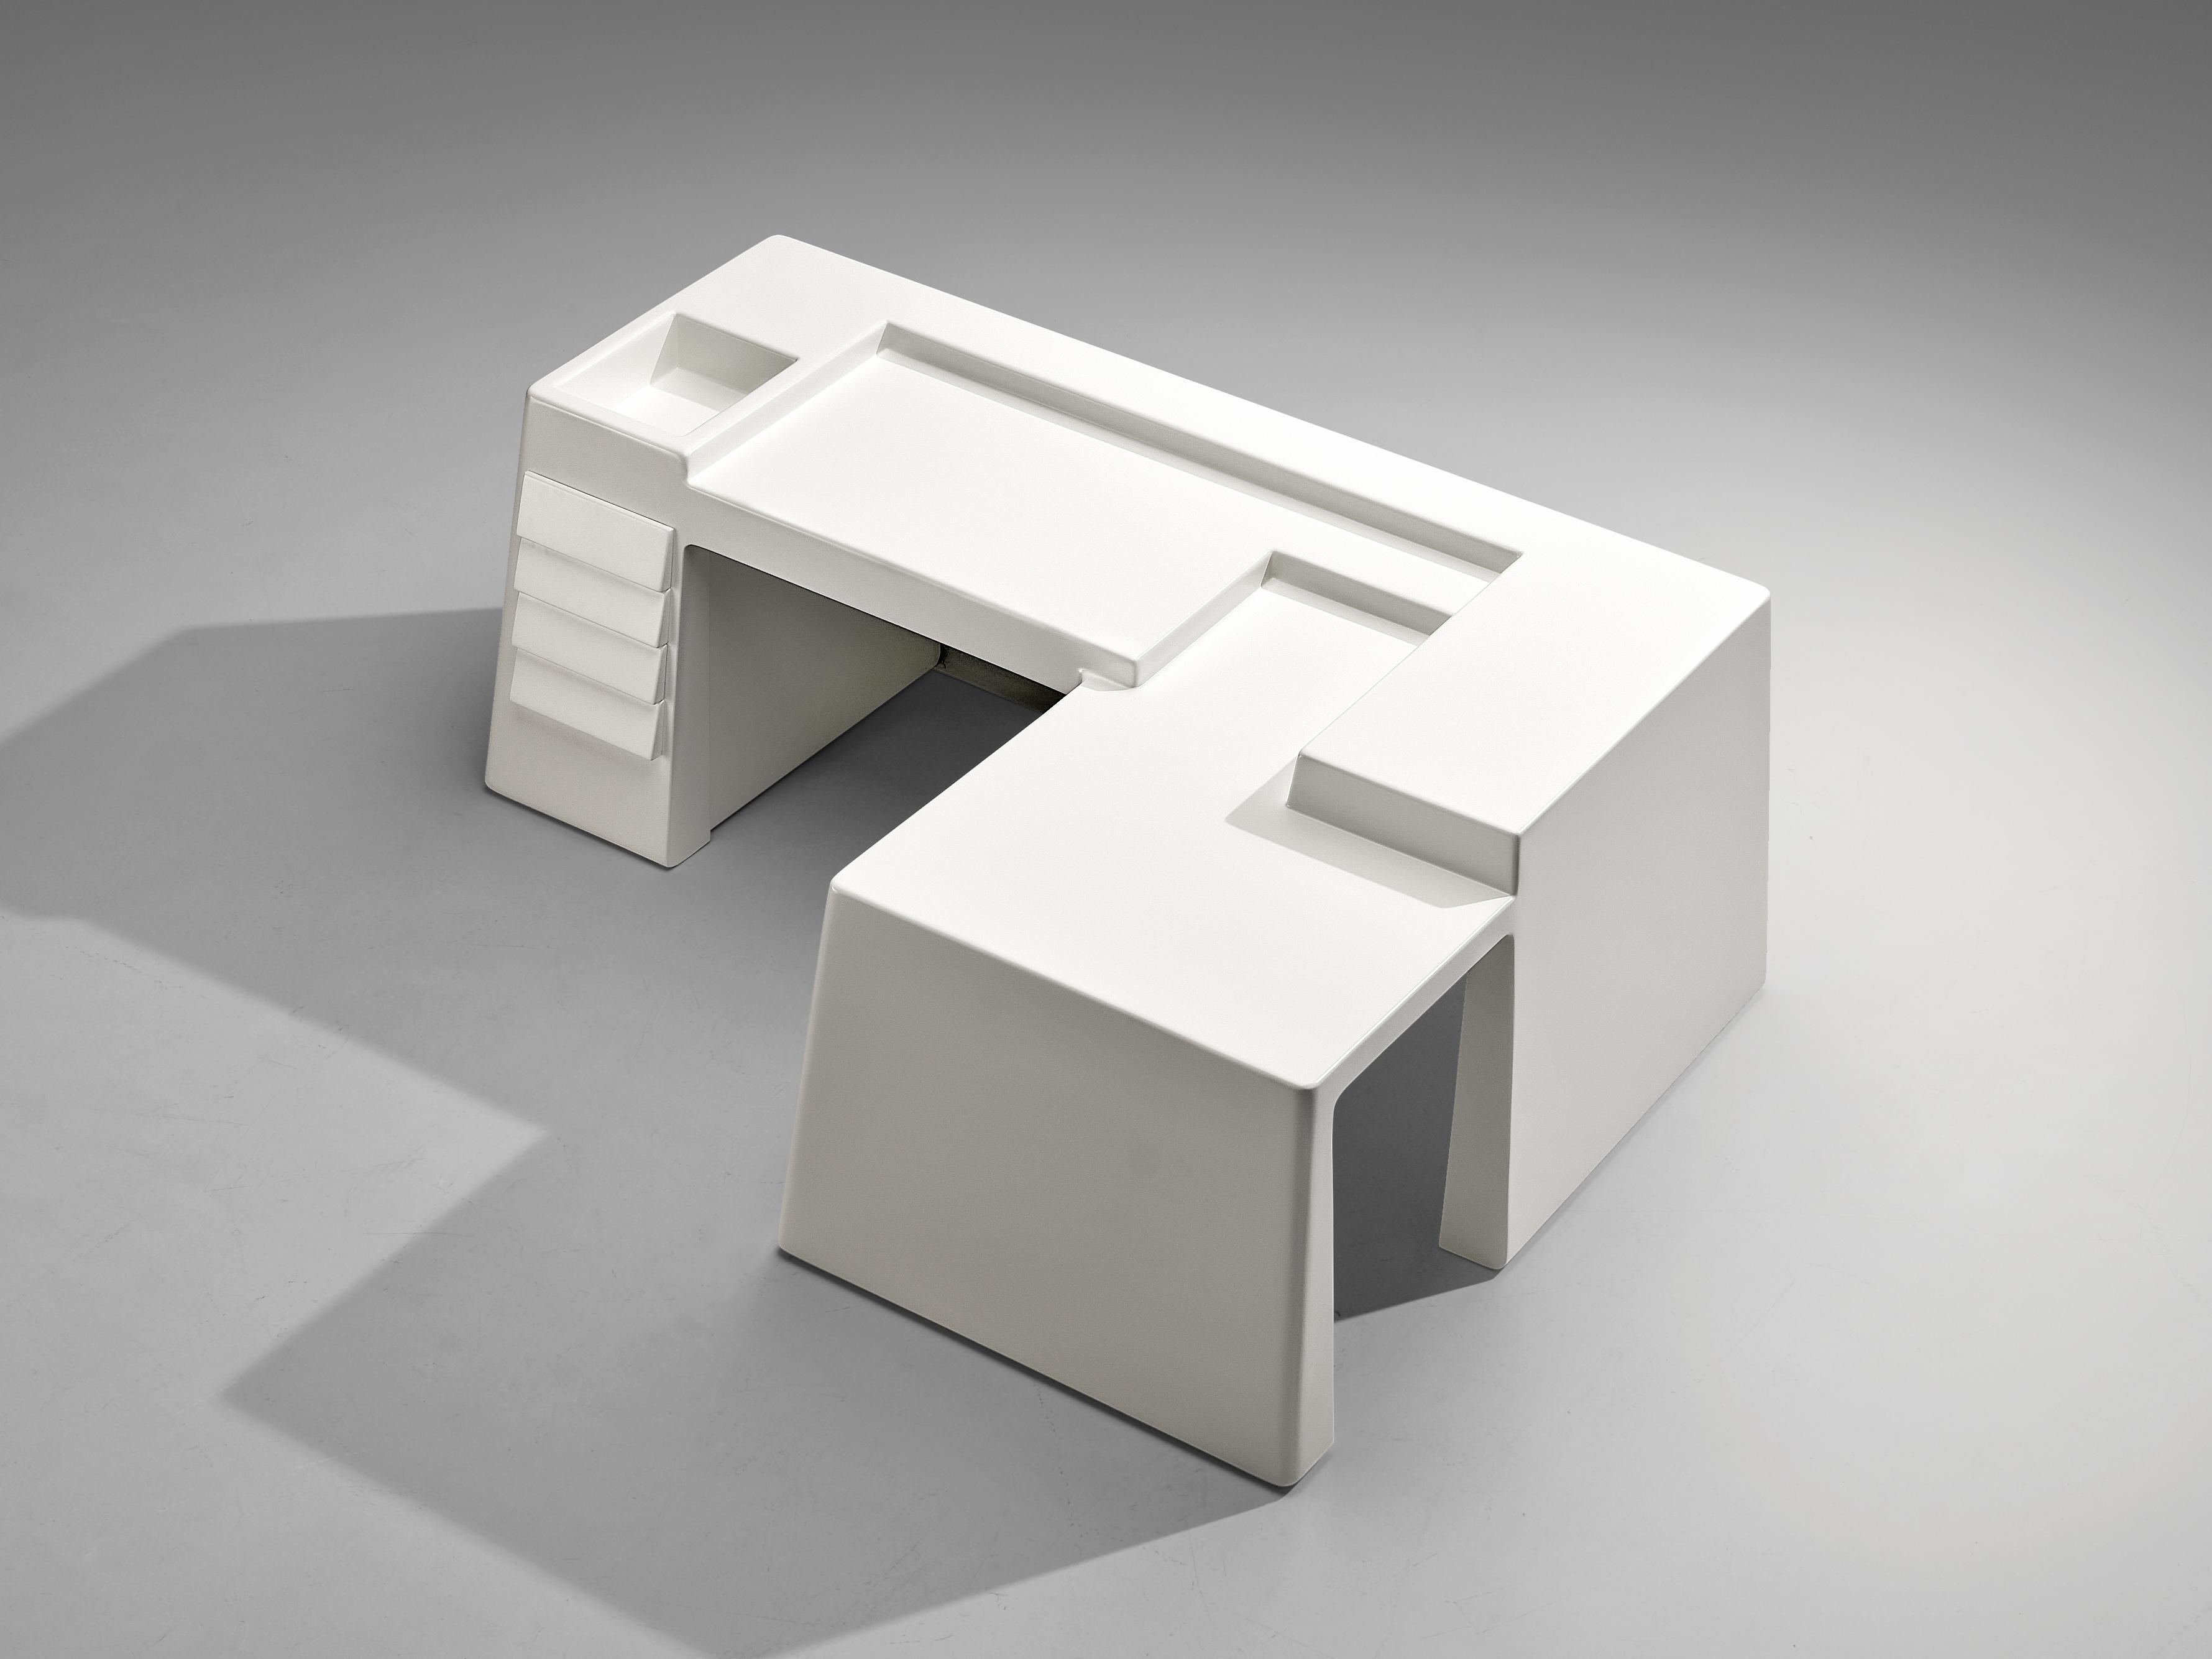 Vittorio Introini for Saporiti, restored free-standing desk, fiberglass, Italy, 1969

This admirable free-standing corner desk was designed by the Italian designer Vittorio Introini. Due to its all-white design and the distinct shapes, this desk